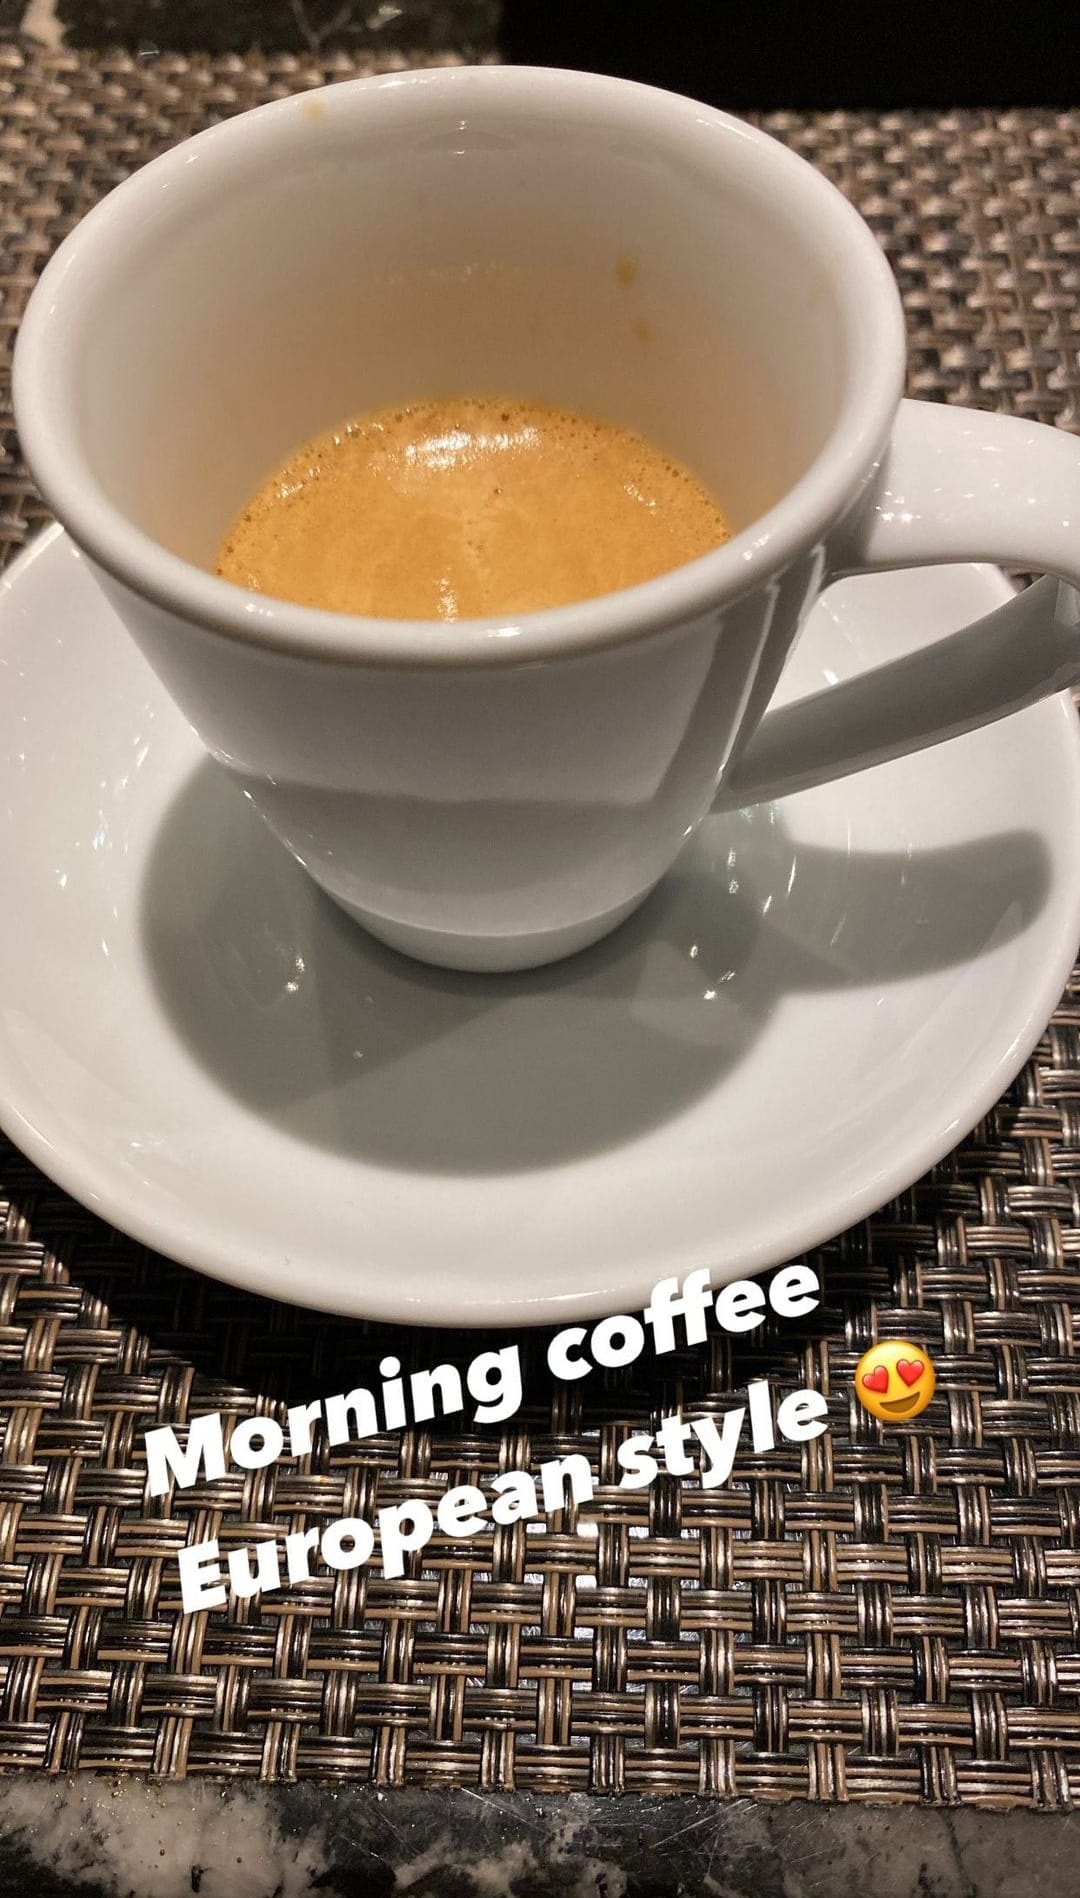 janelle brown shares pic of coffee in portugal in IG Stories